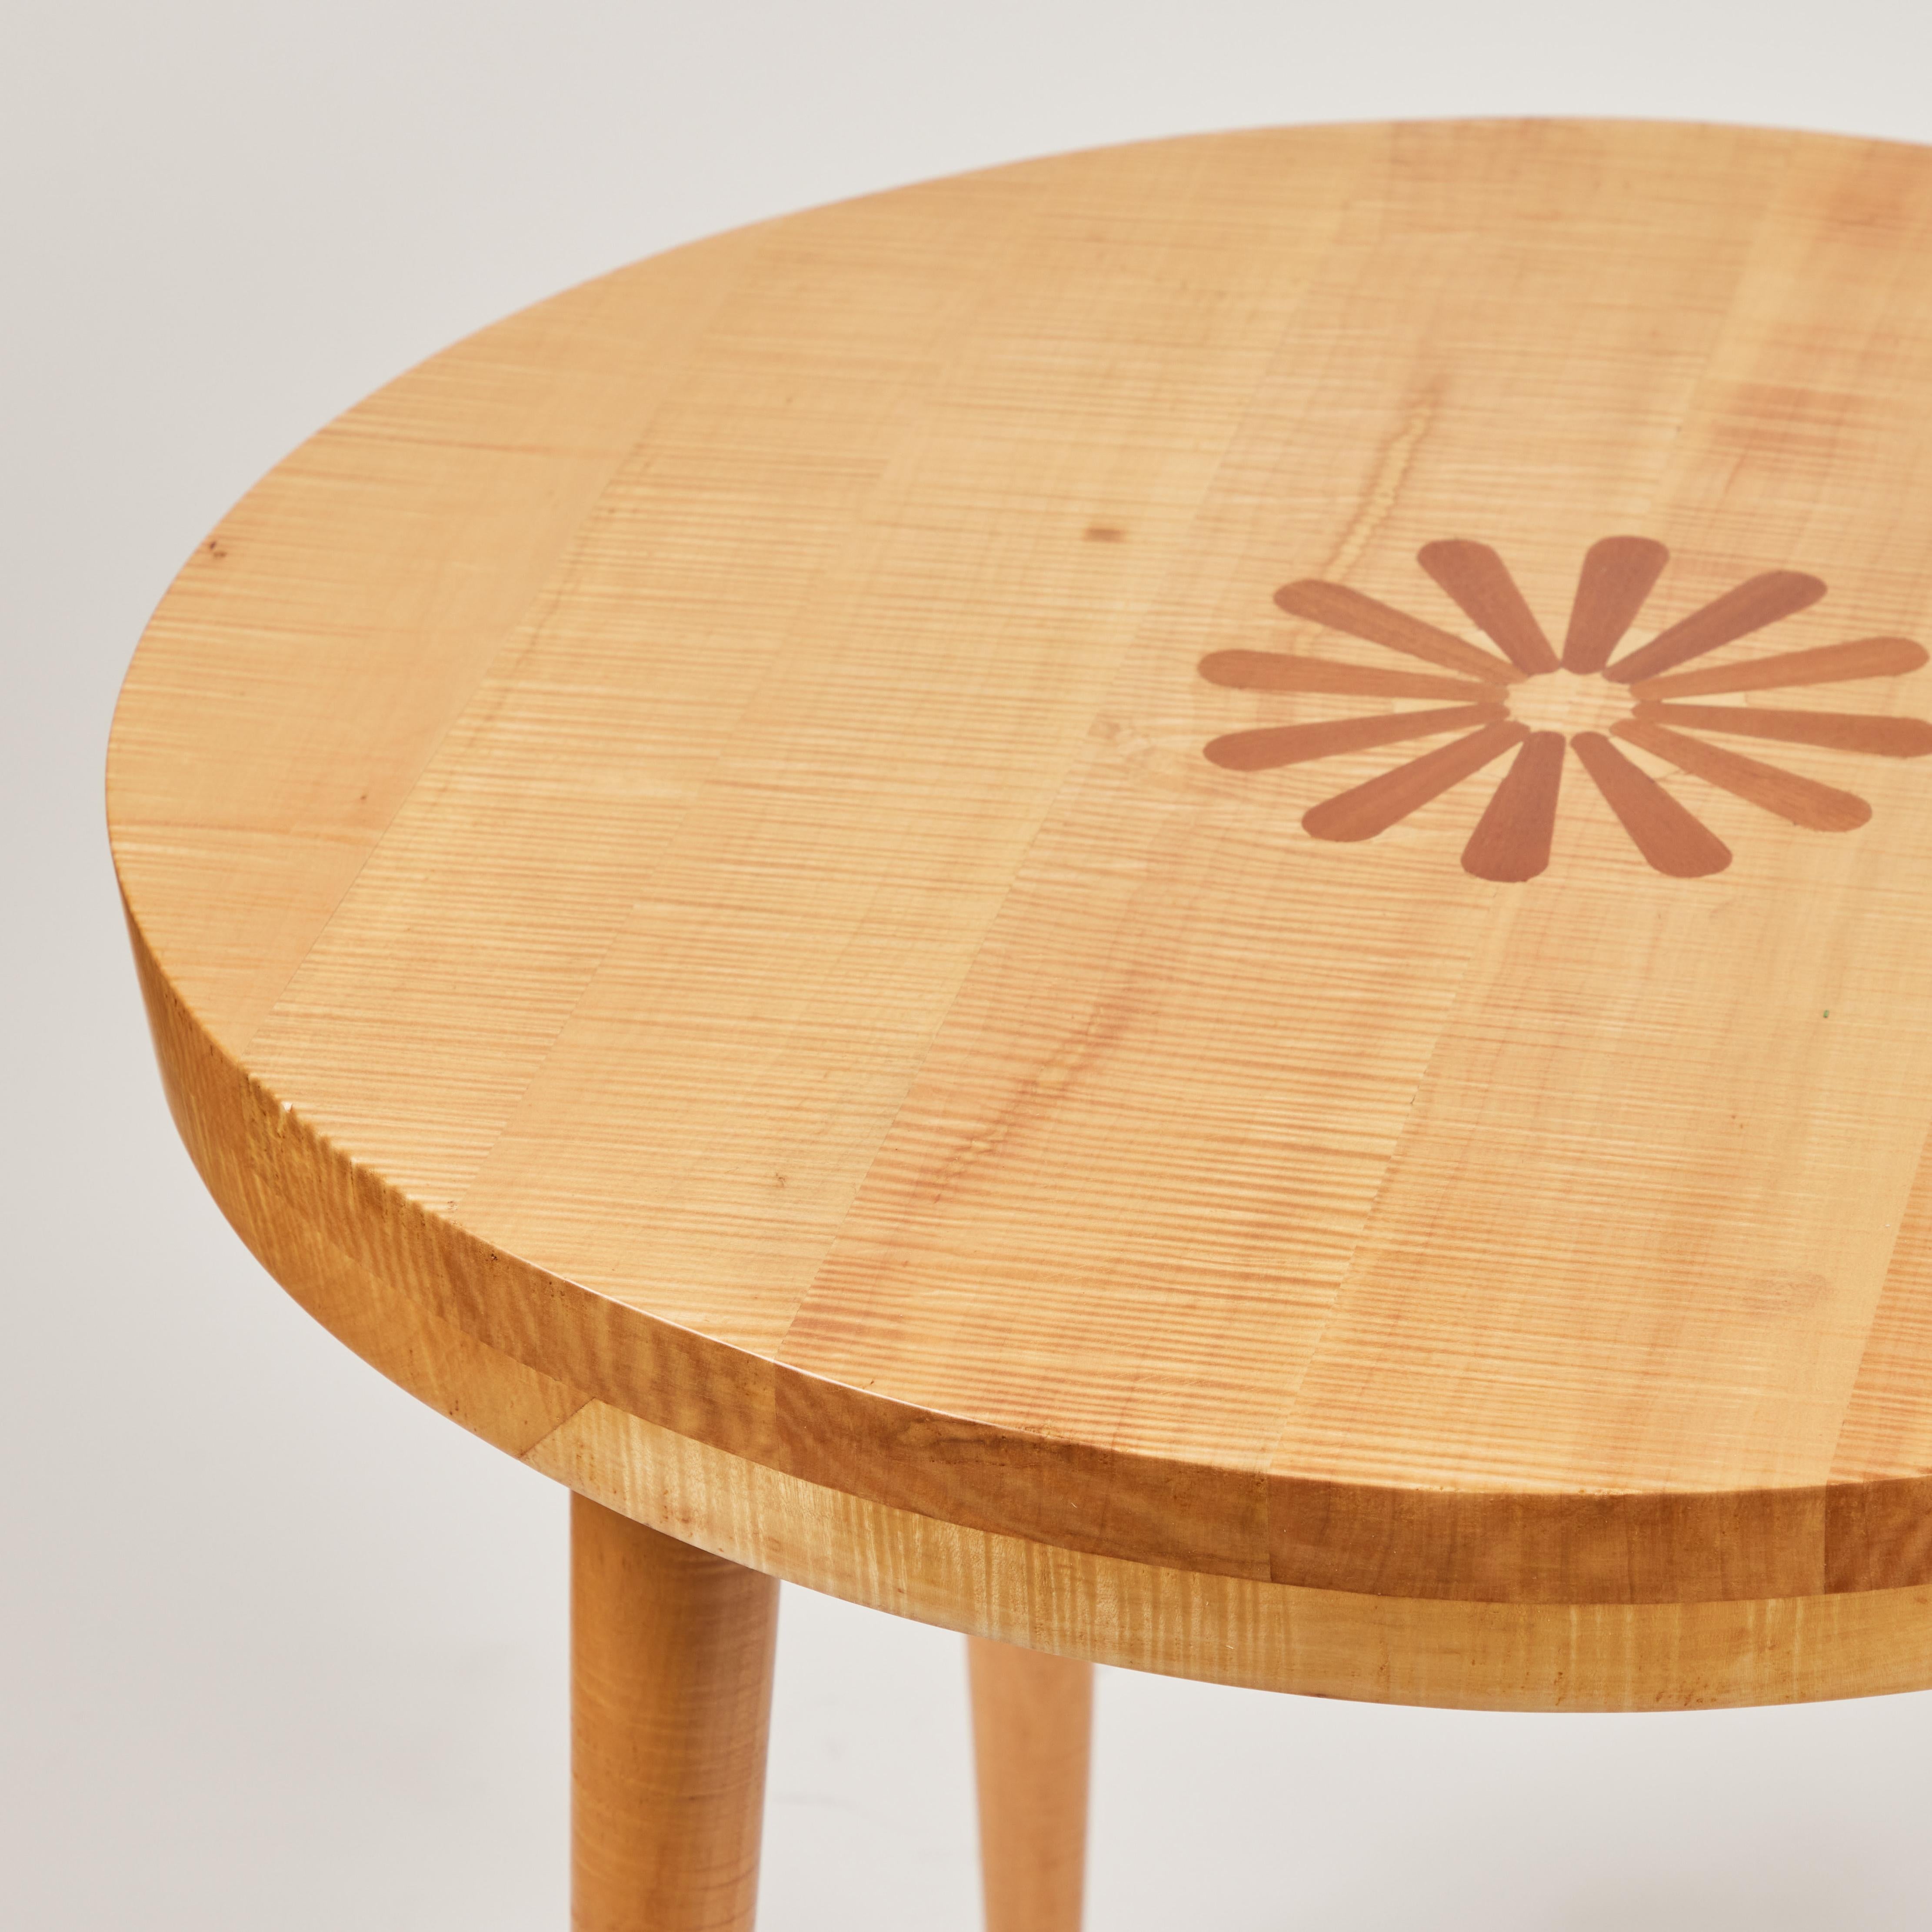 This cool mod midcentury tiger maple round side table is a real beauty. It has a decorative inlaid contrasting color wood flower design on the top center and has been newly refinished with a beautiful clear coat to showcase the outstanding